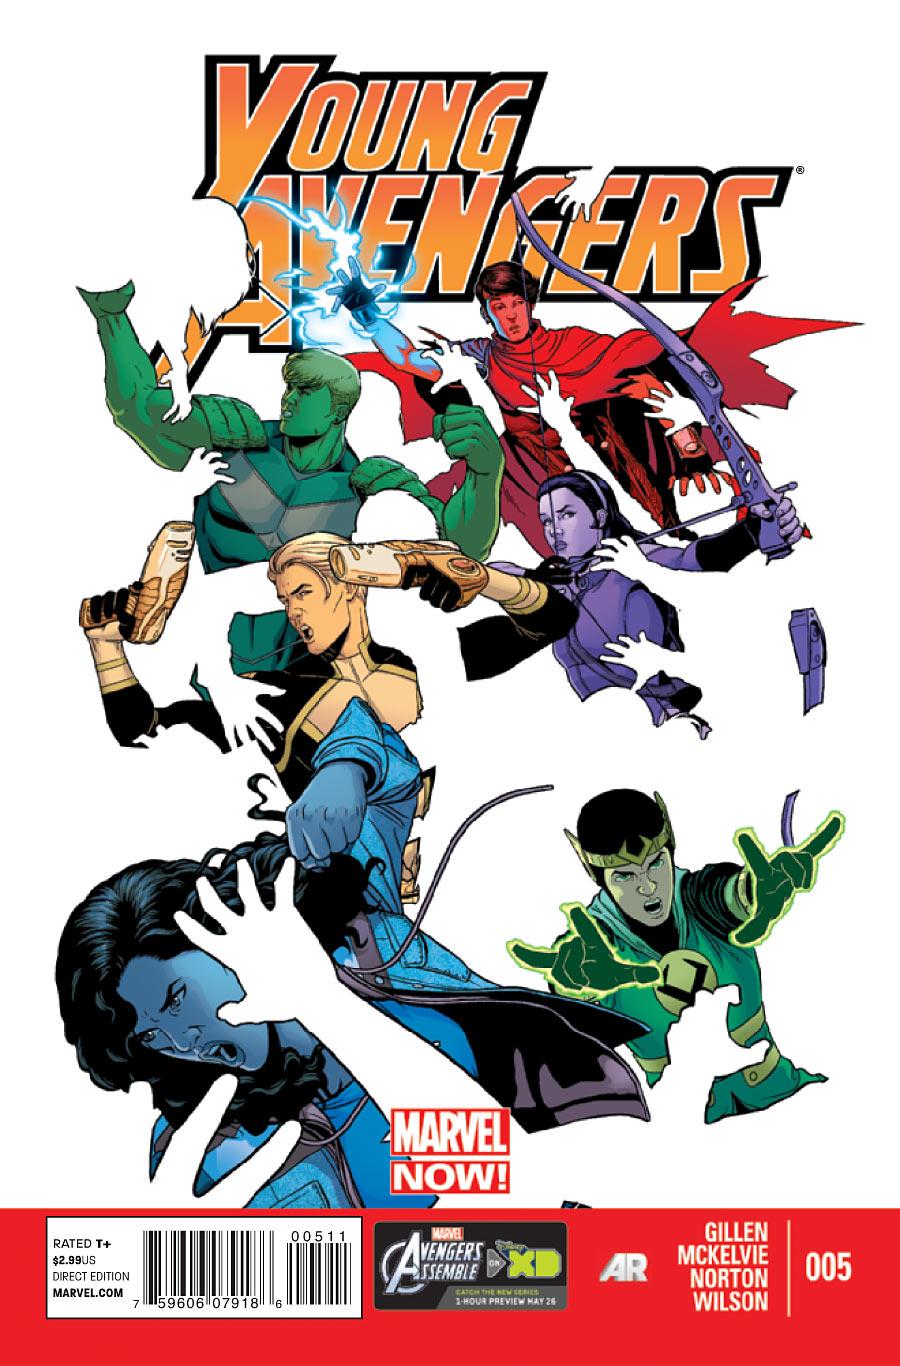 Young Avengers Vol. 2 #5